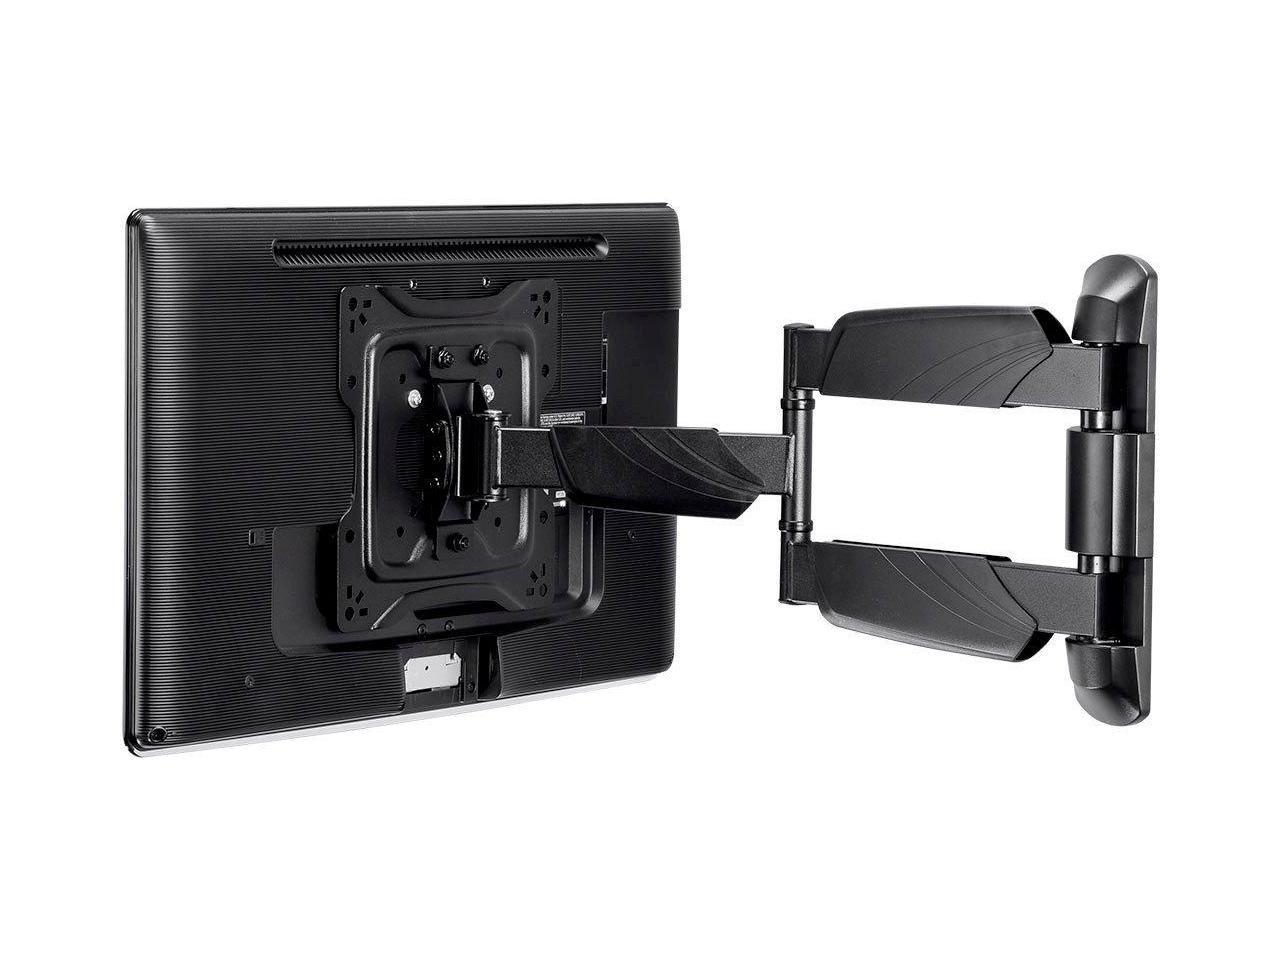 Monoprice Full-Motion Articulating TV Wall Mount Bracket - For LED TVs 24in to 55in, Max Weight 77 Lbs., VESA Patterns Up to 400x400, Rotating, Low Profile, UL Certified - Commercial Series - image 4 of 20